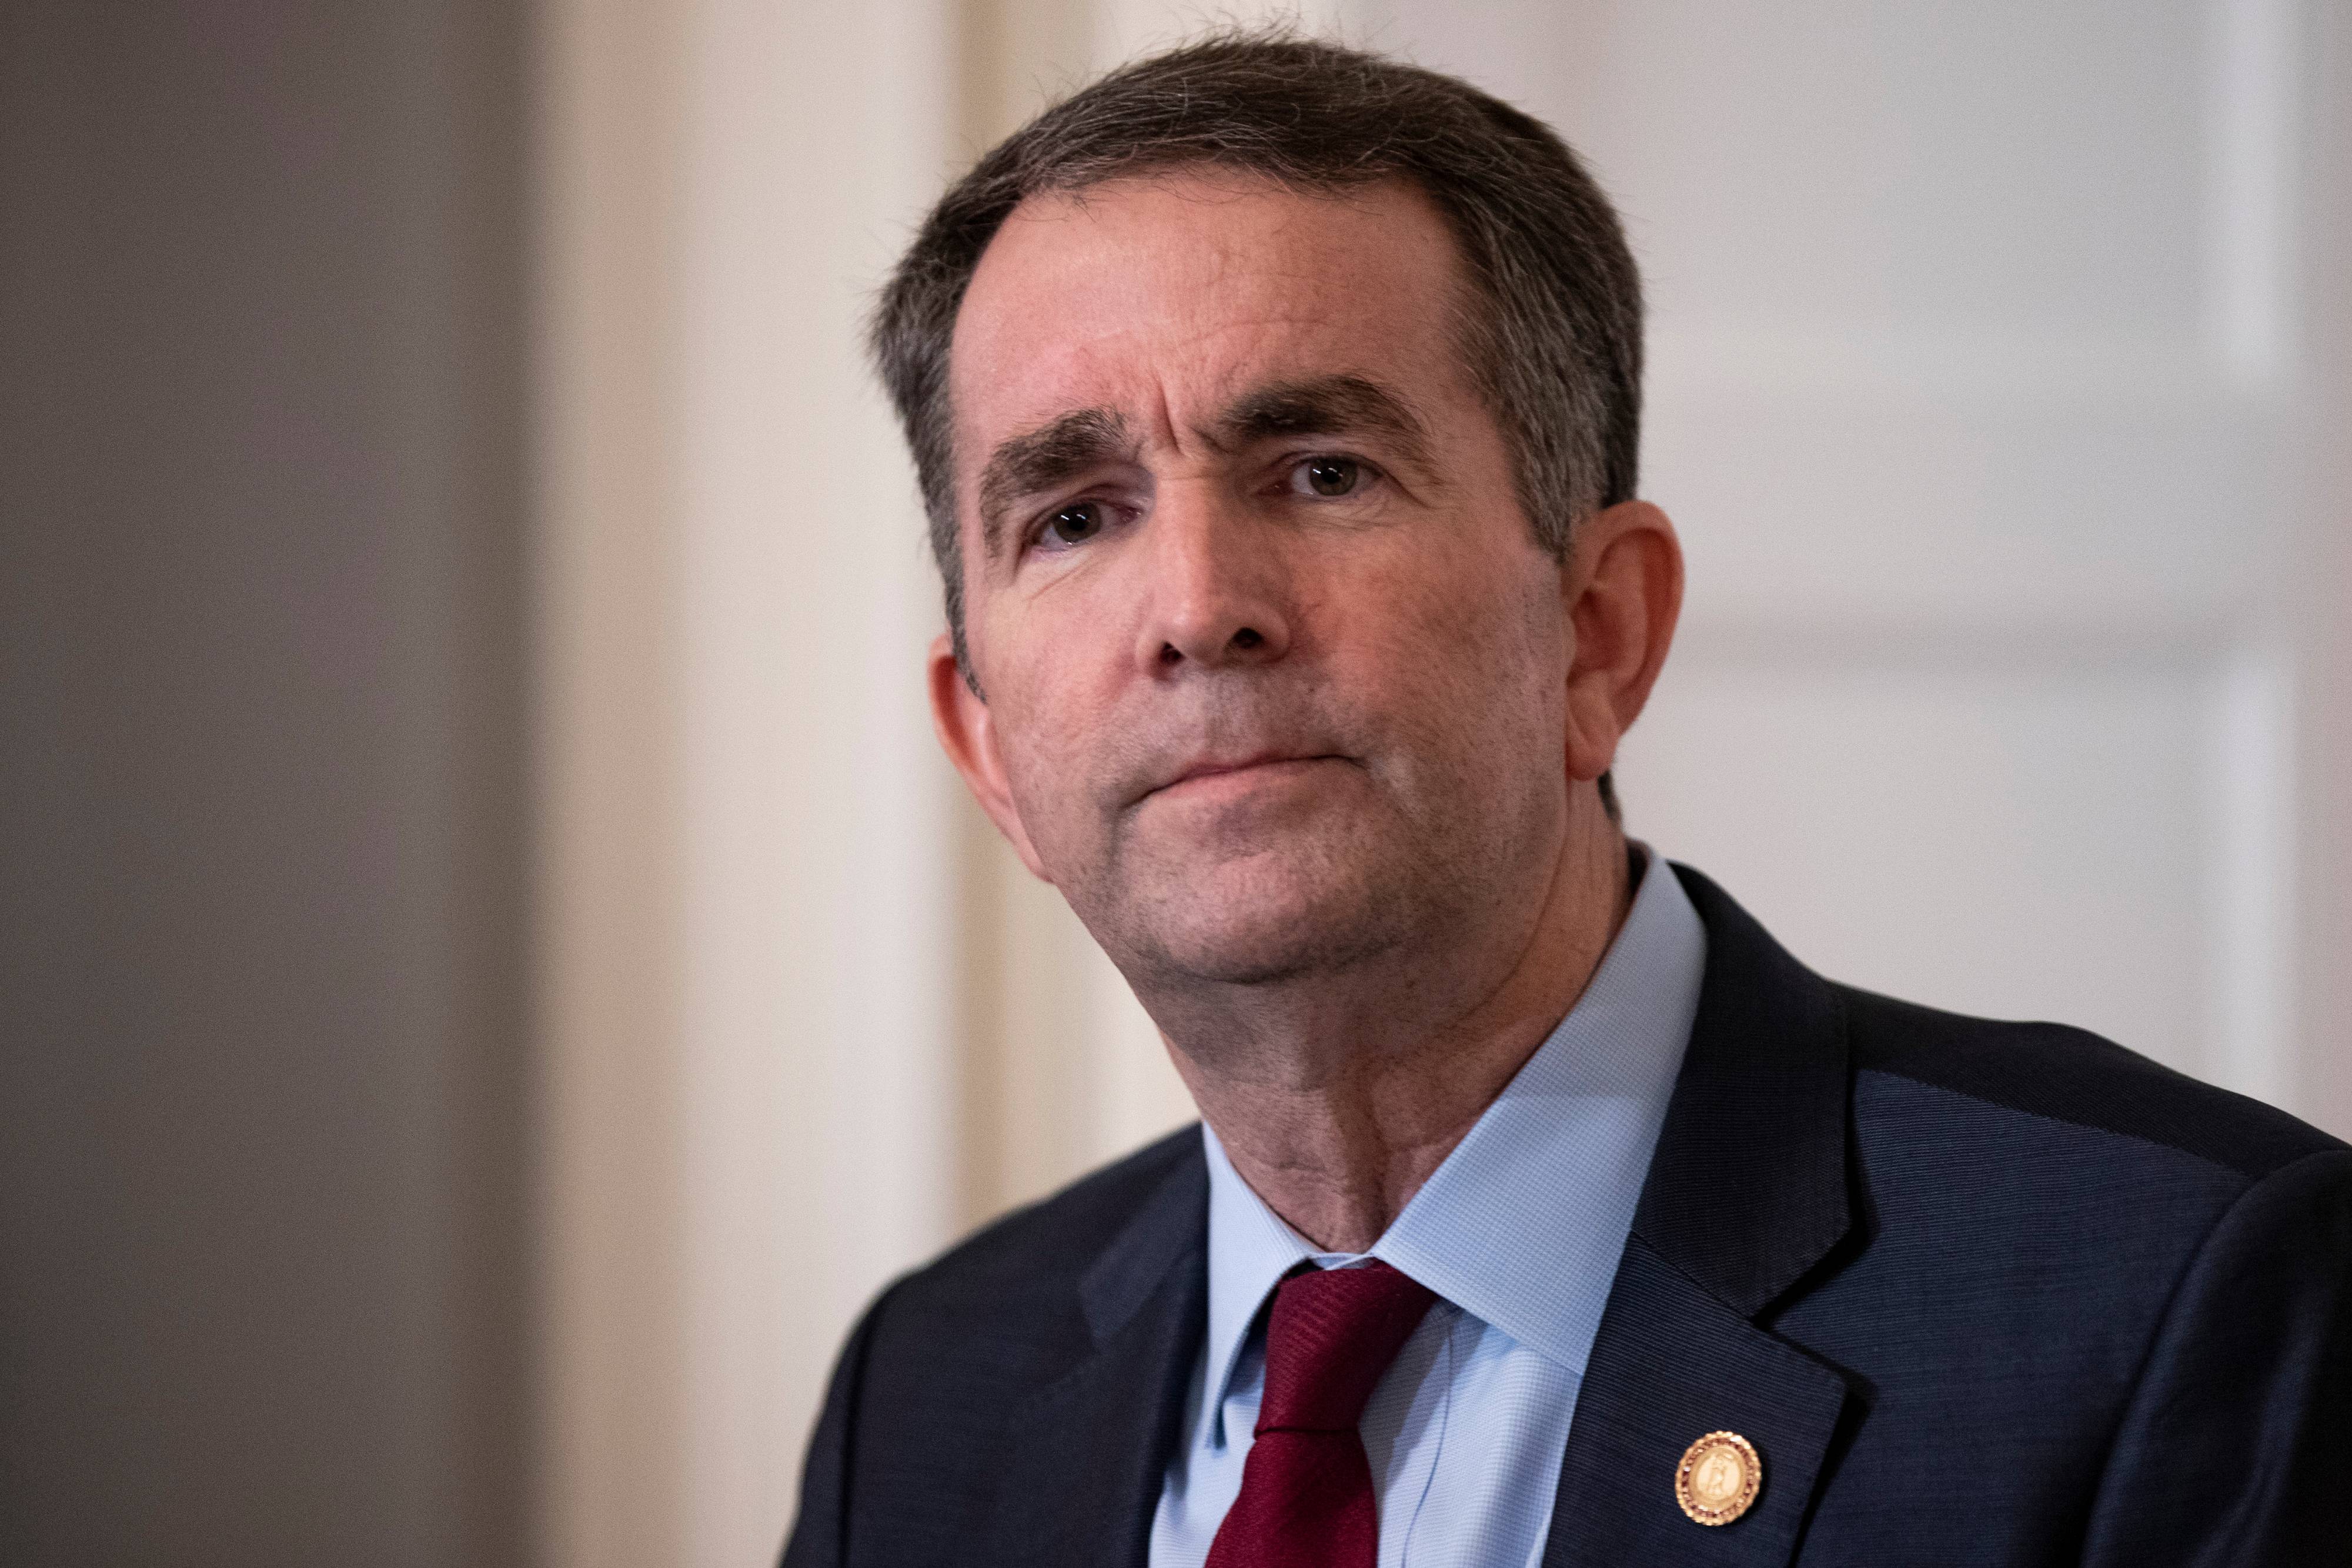 Governon Ralph Northam holds a press conference to address racist yearbook photo | Photo: Getty Images